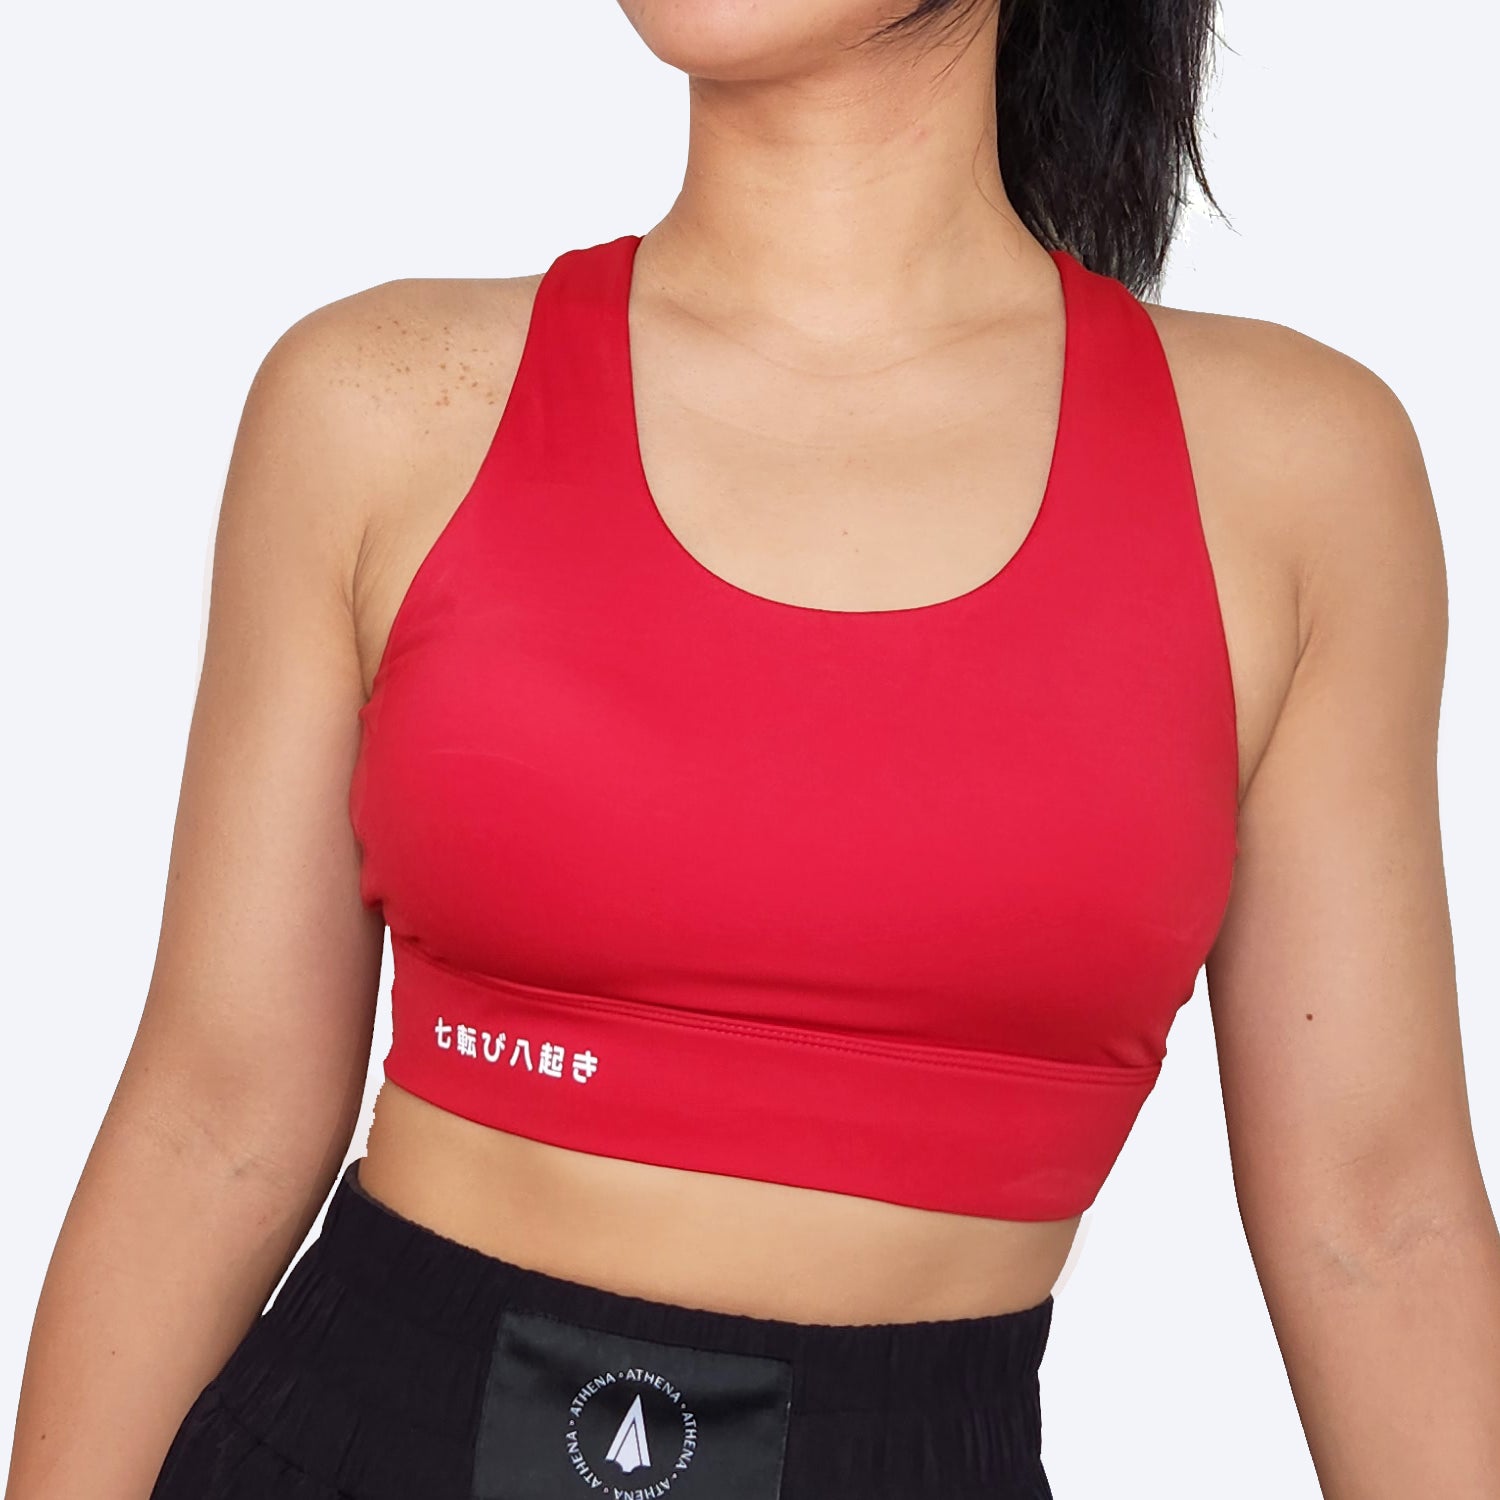 Athena Fightwear Theia Sports Bra (Red) for women's boxing, muay